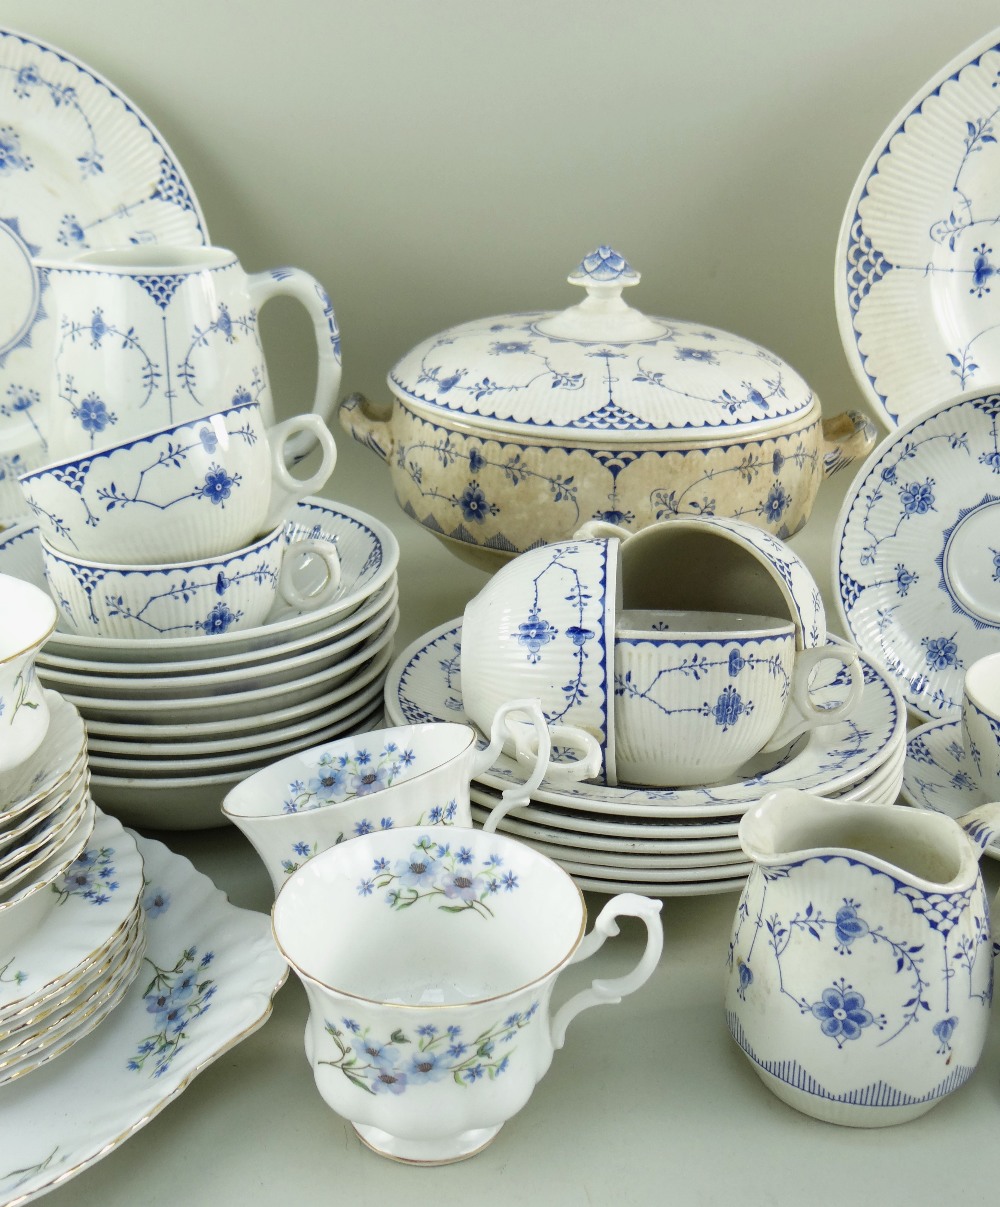 MATCHED PART SERVICE OF 'DENMARK' PATTERN BLUE & WHITE DINNERWARES, mainly by Furnivals Ltd., - Image 4 of 20